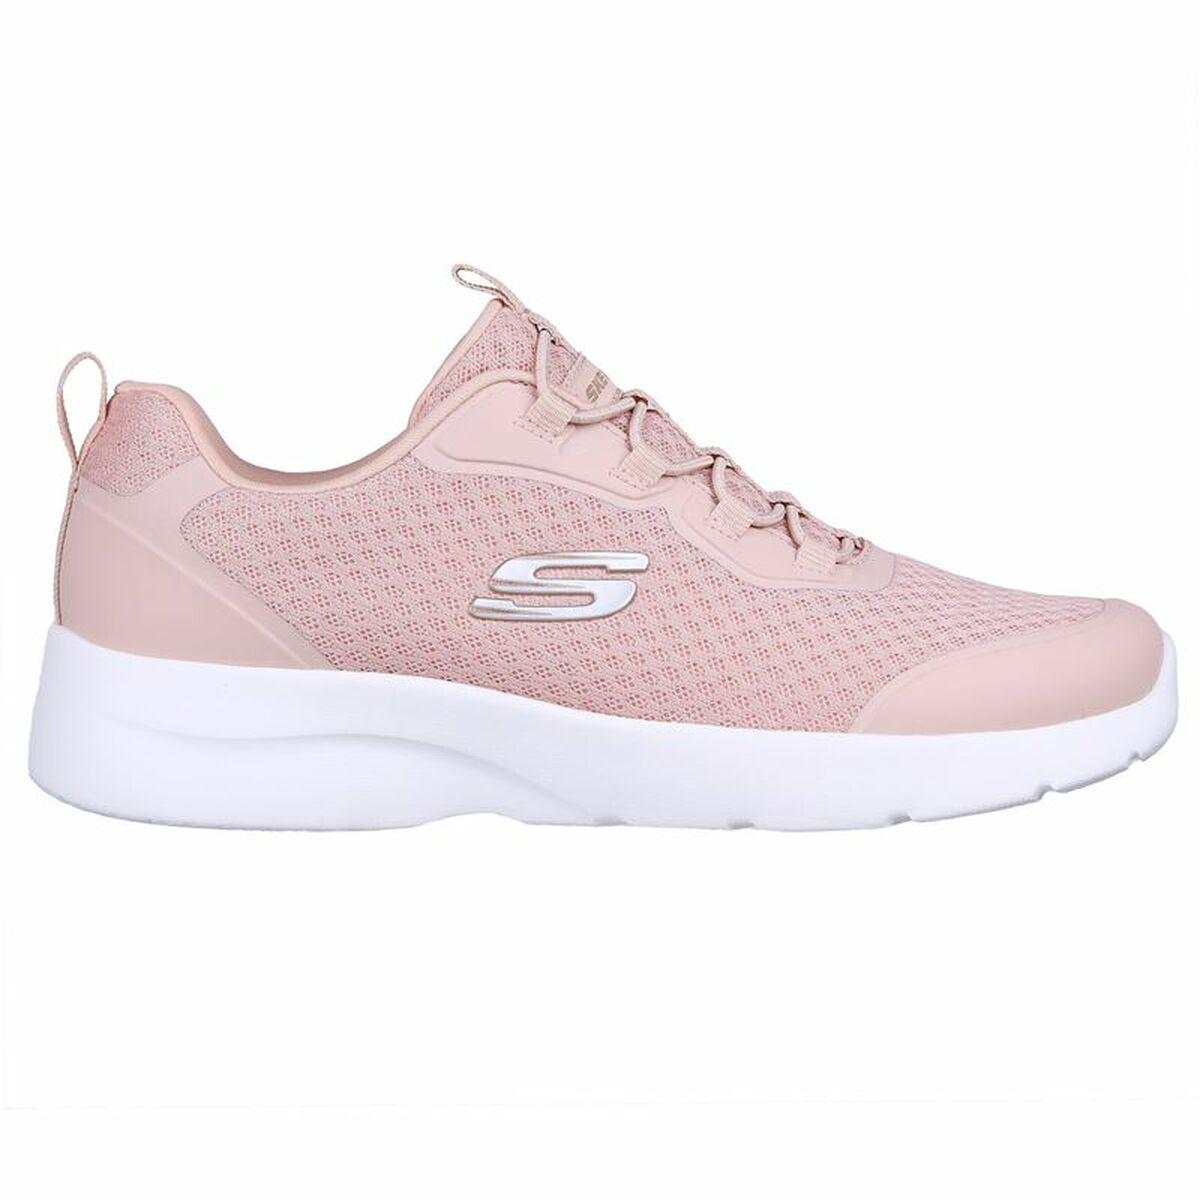 Skechers Sports Trainers For Women Dynamight 2.0 Light Pink | Lyst